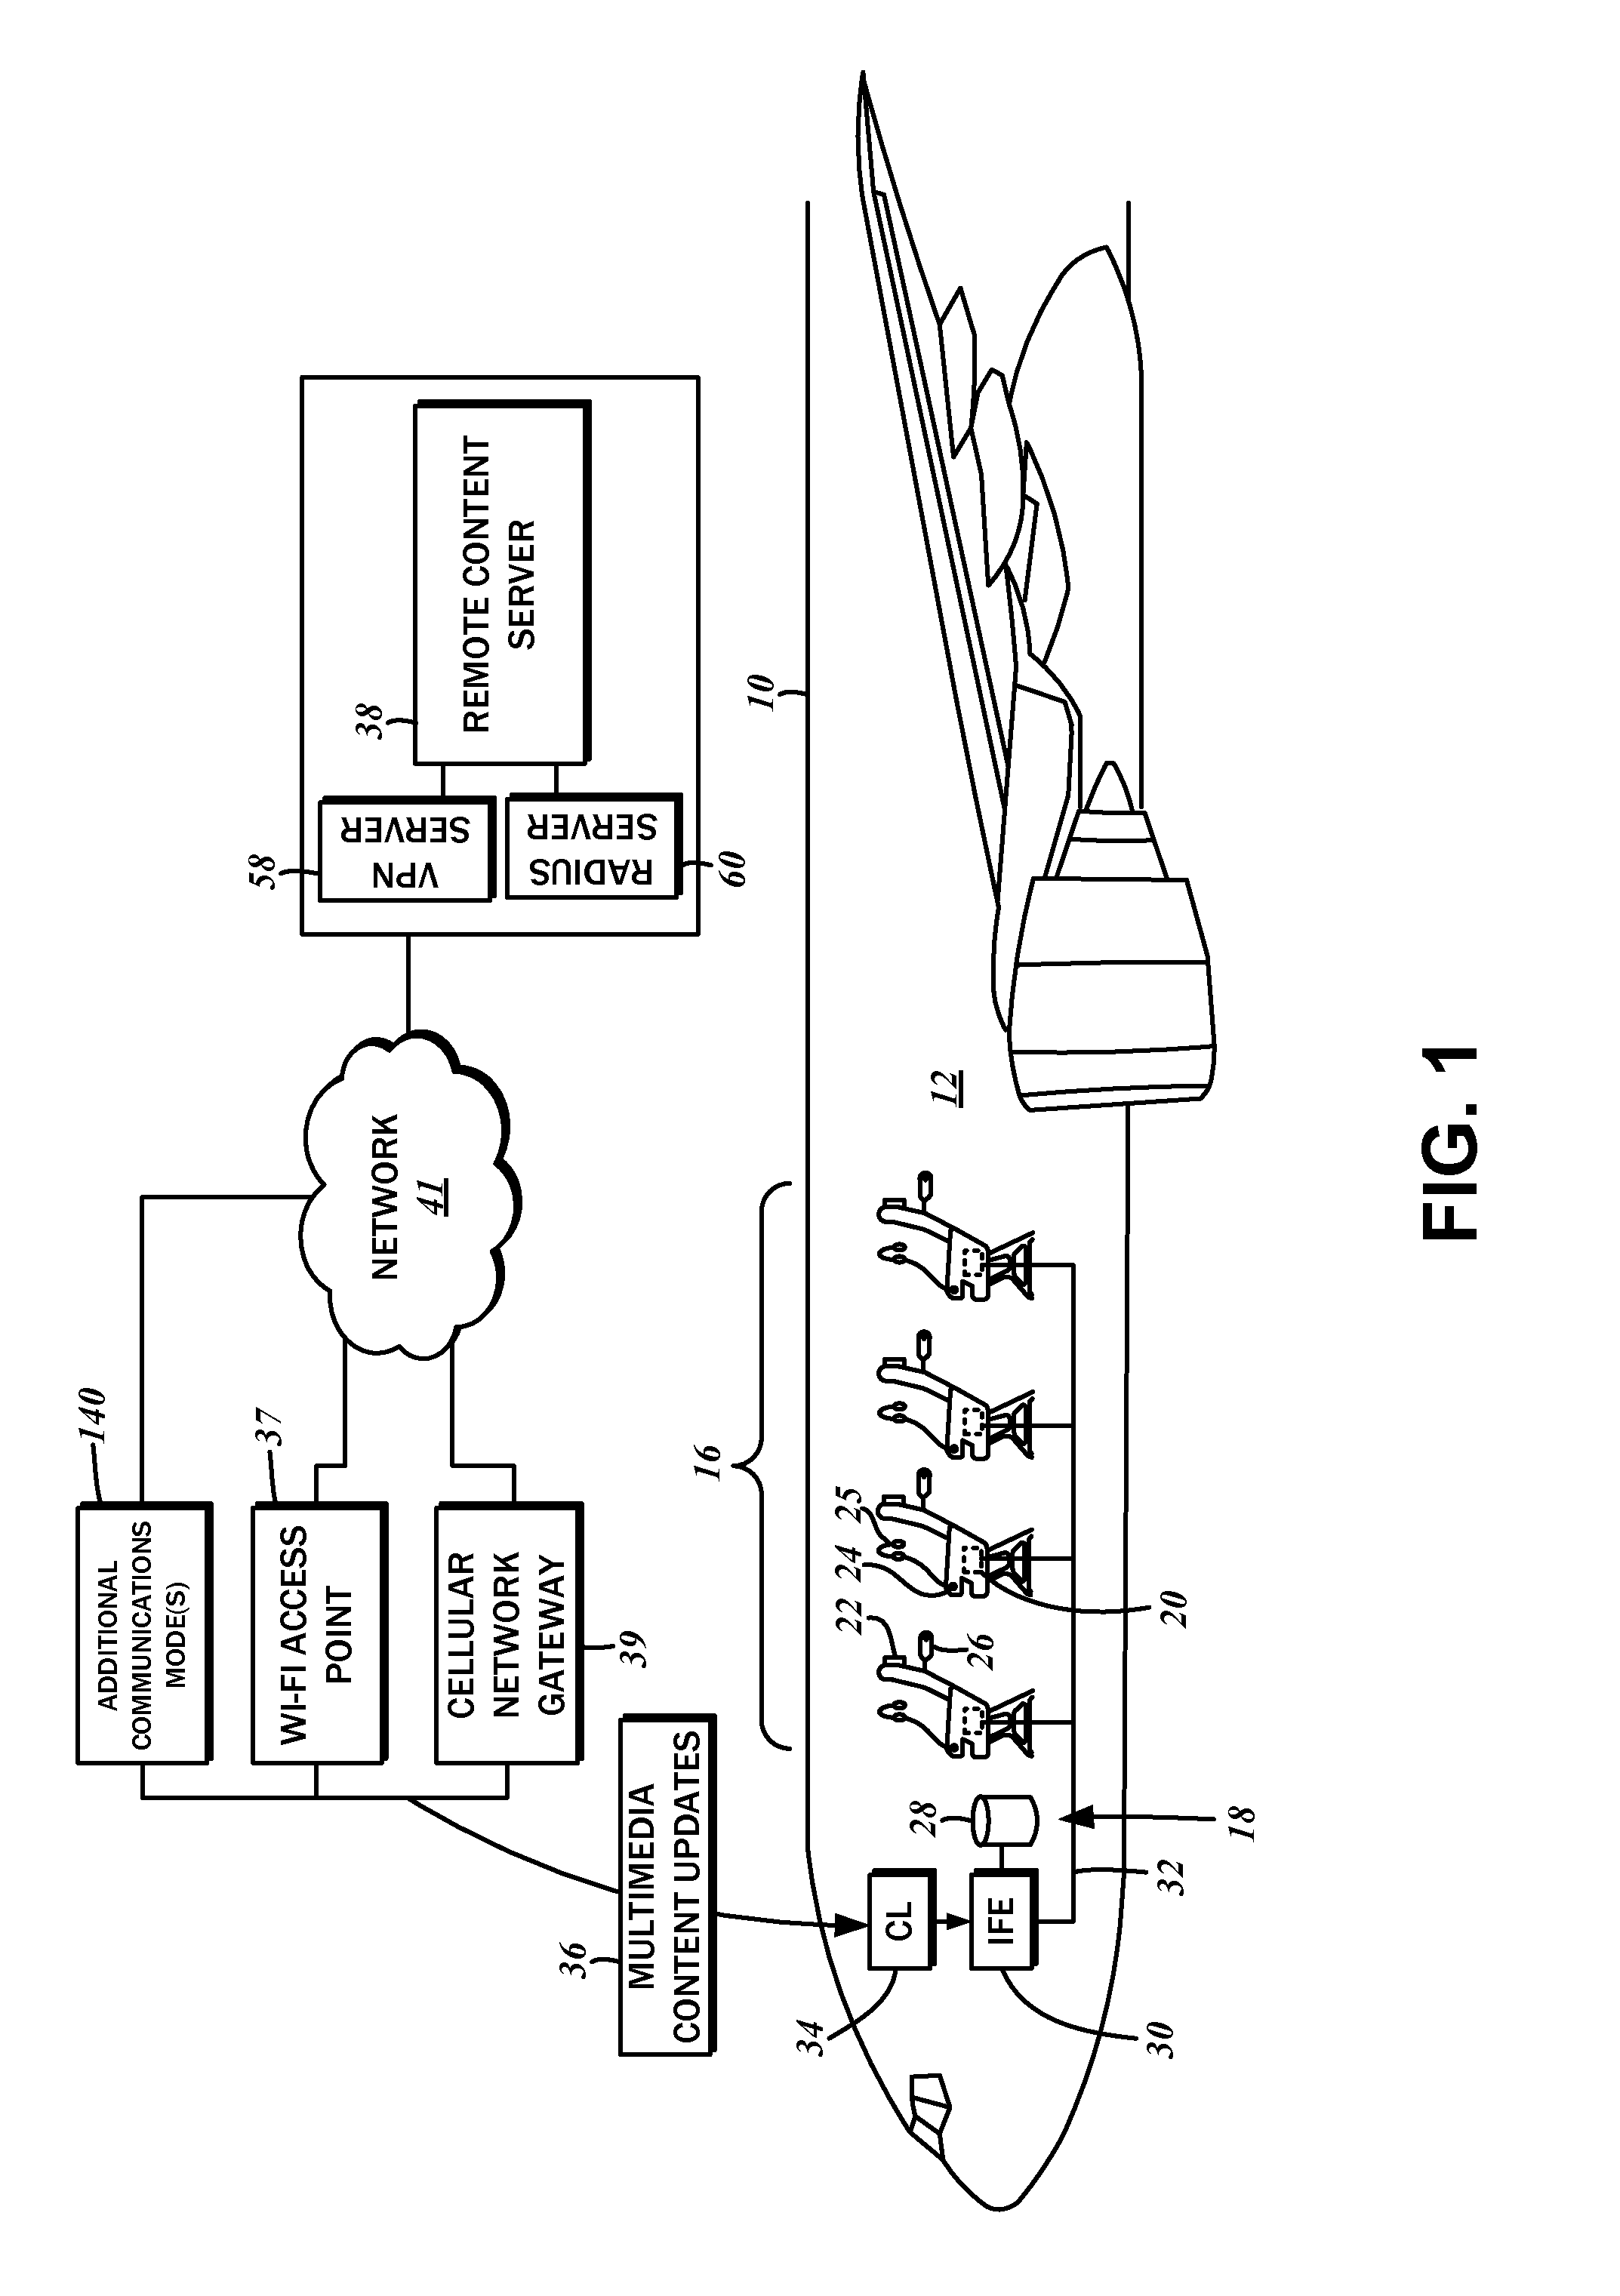 Wireless content loader for entertainment system